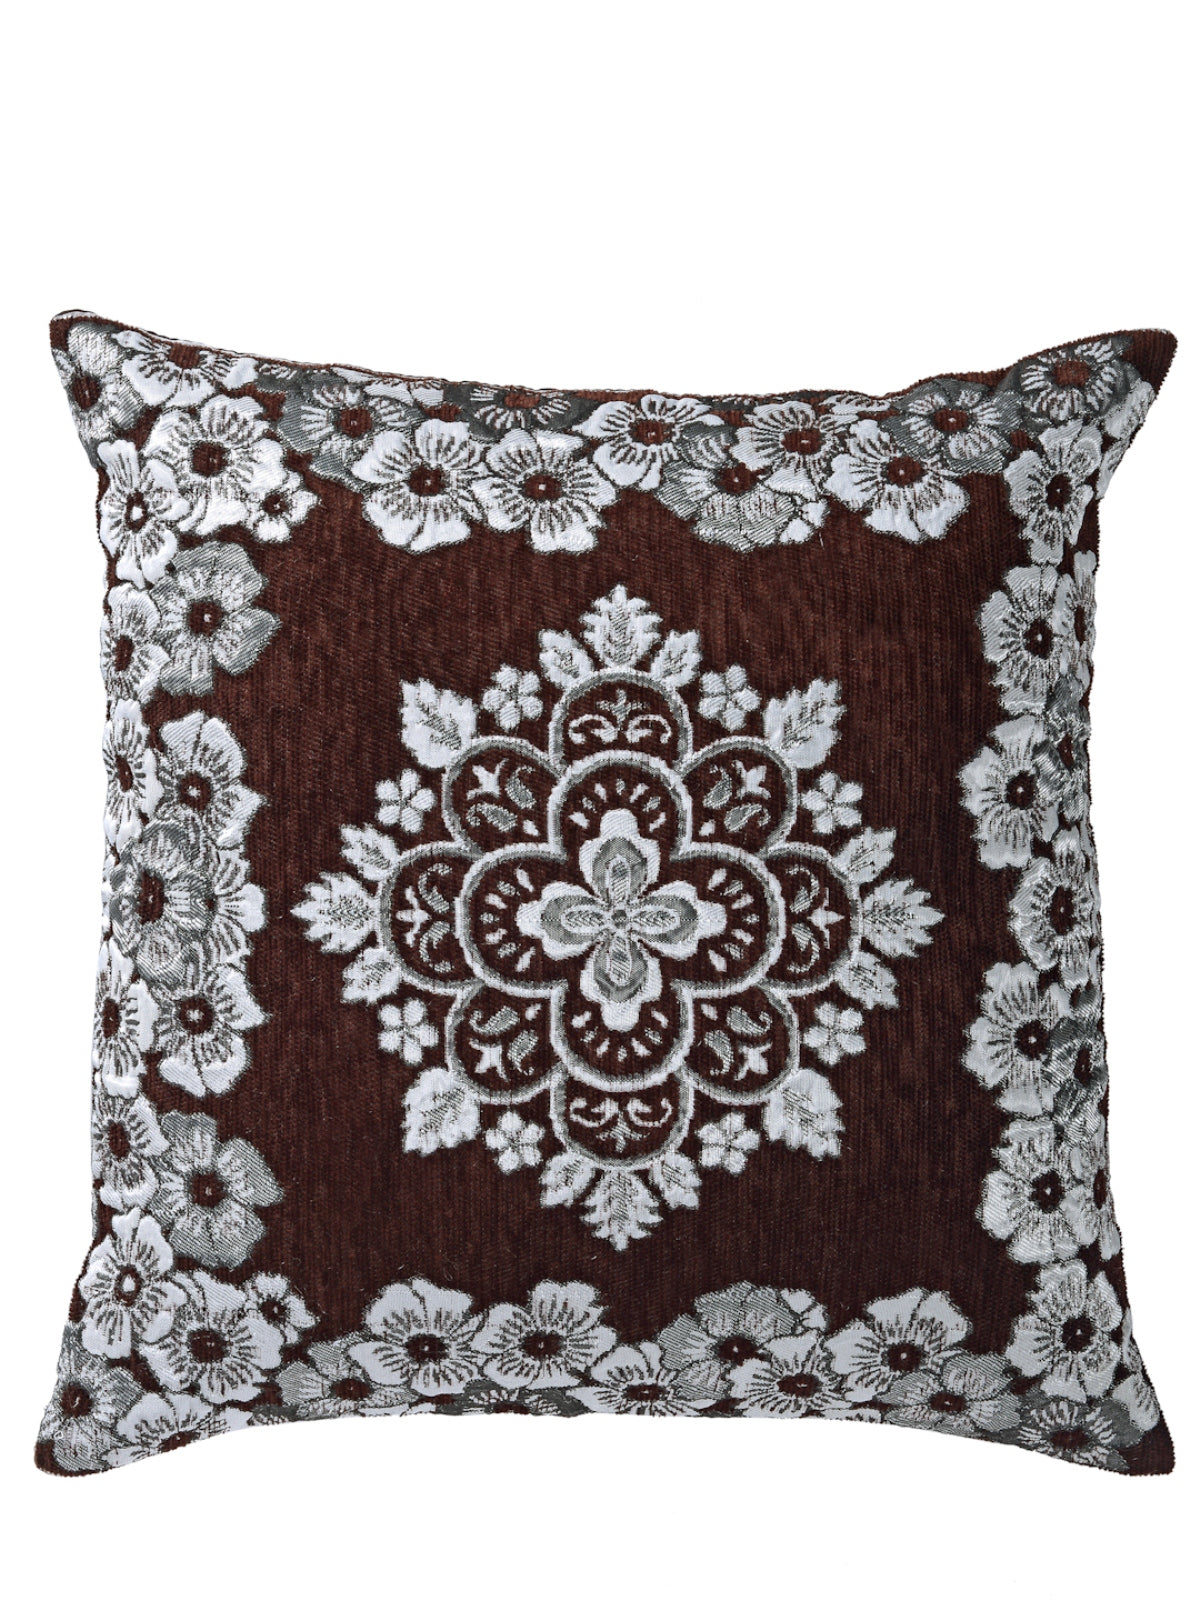 Polyester Chenille Floral Cushion Covers 16x16 inch Set of 5 - Brown